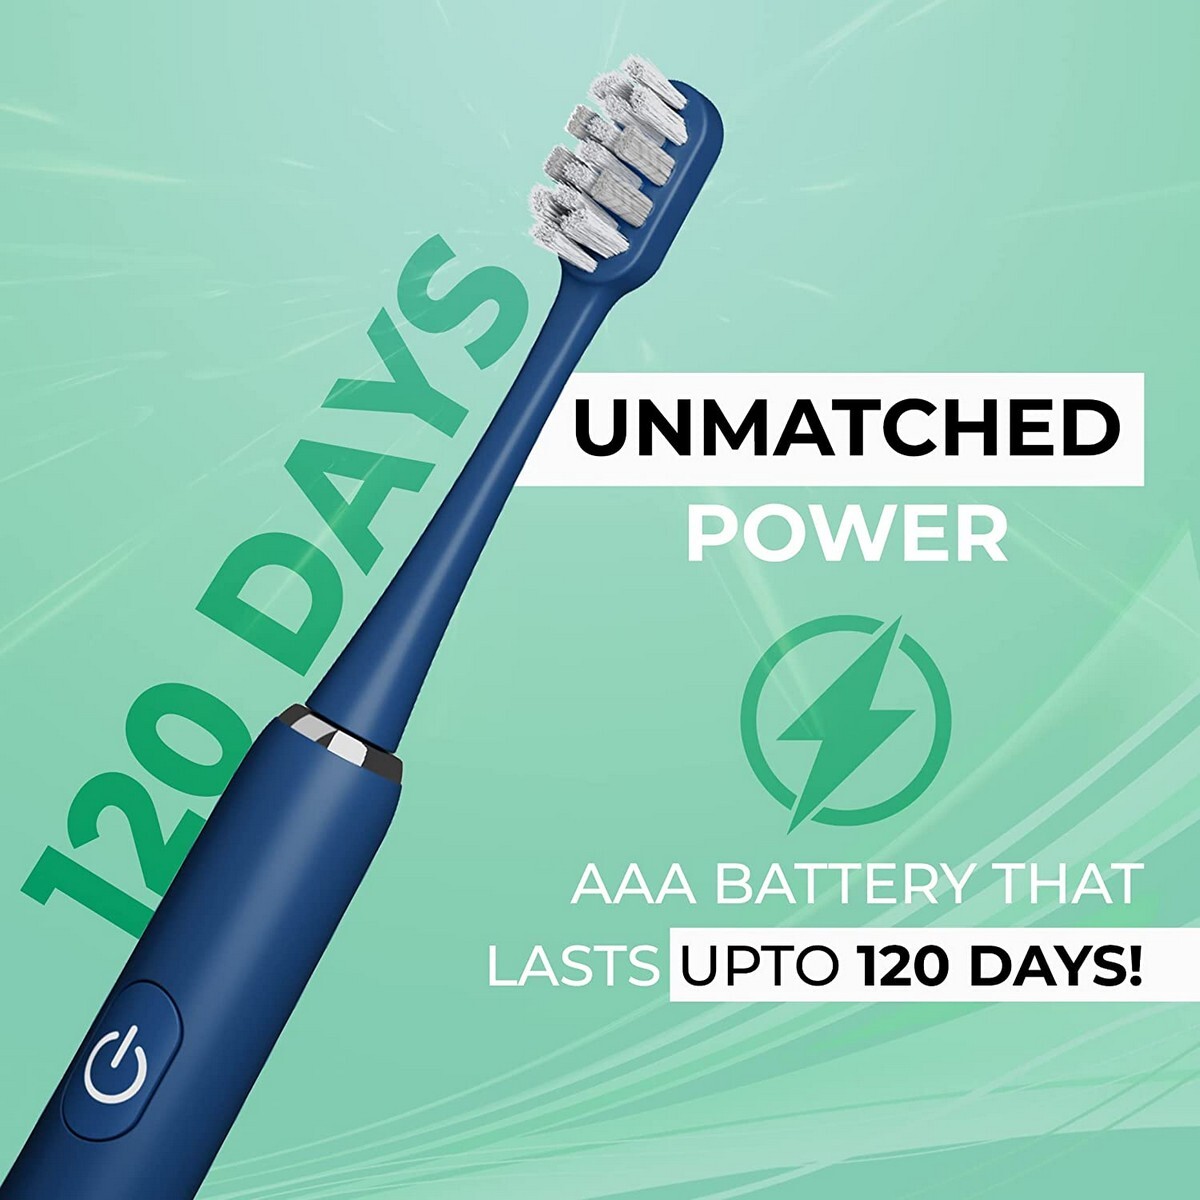 Hammer Flow 2.0 Electric Toothbrush Blue